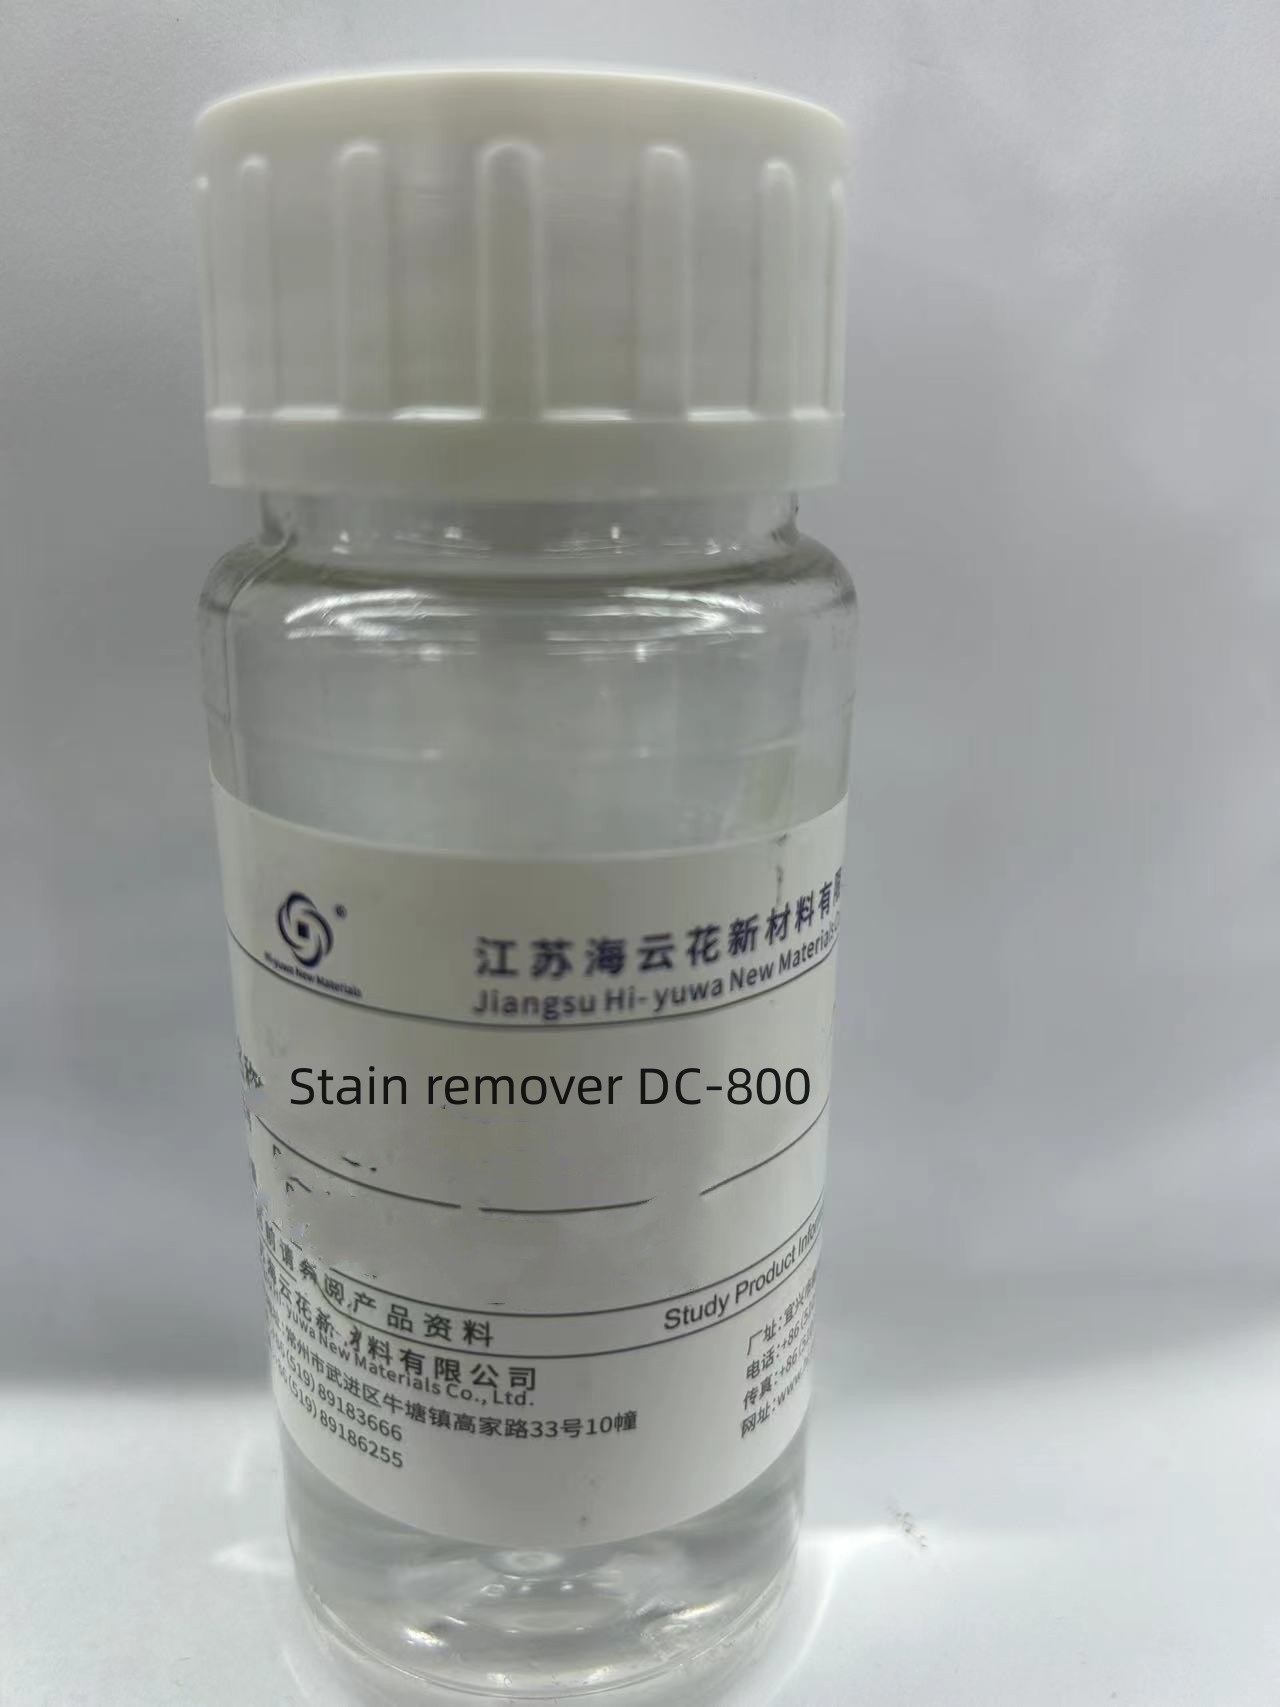 Stain remover DC-800